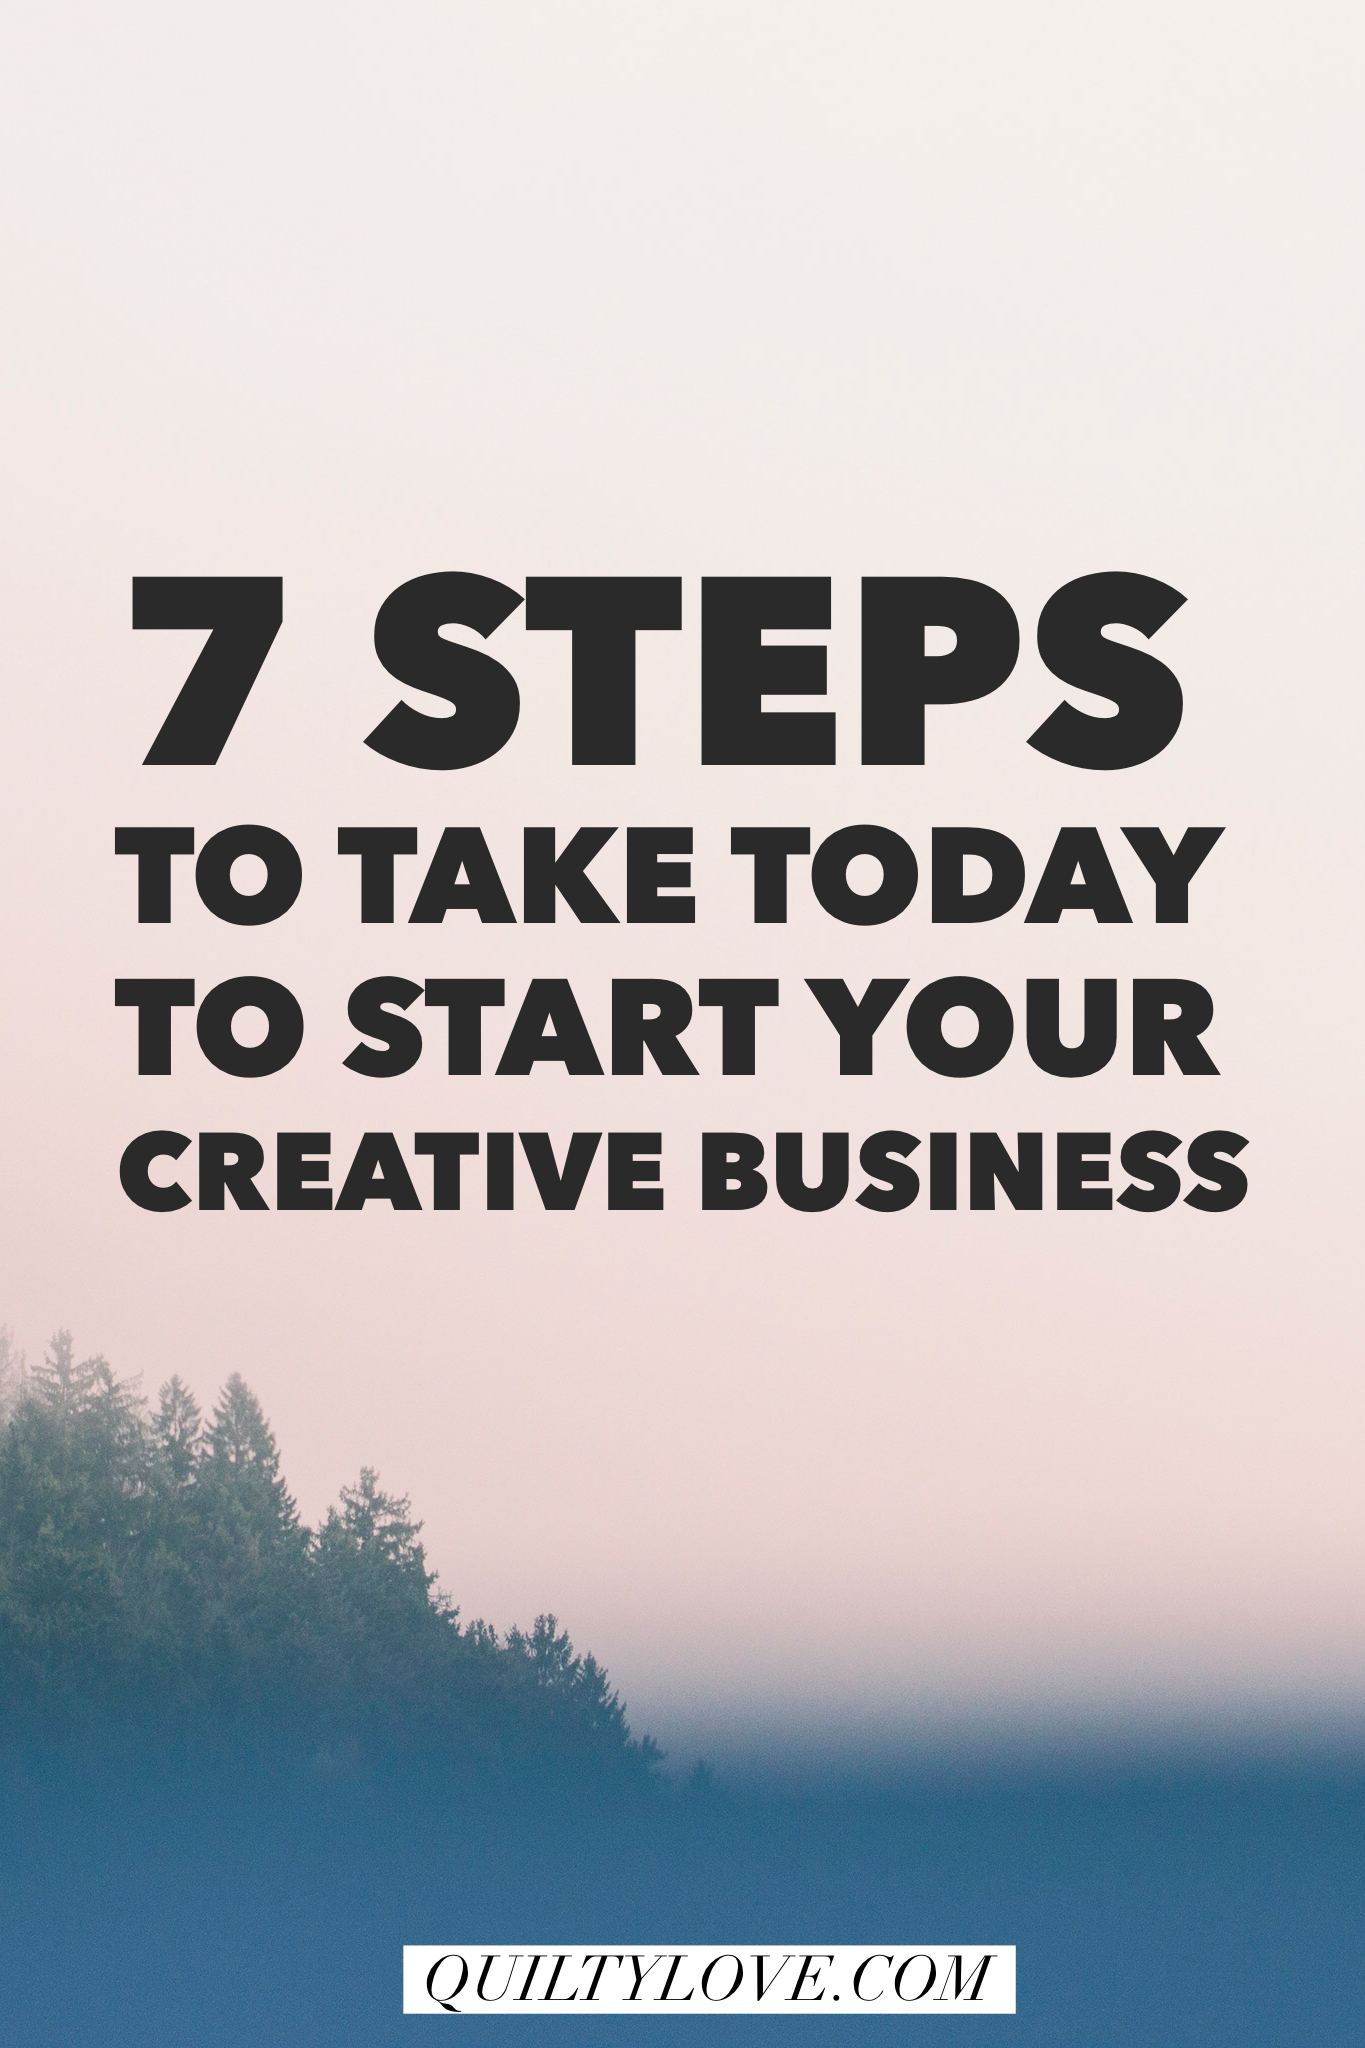 7 steps to take today to start your creative business